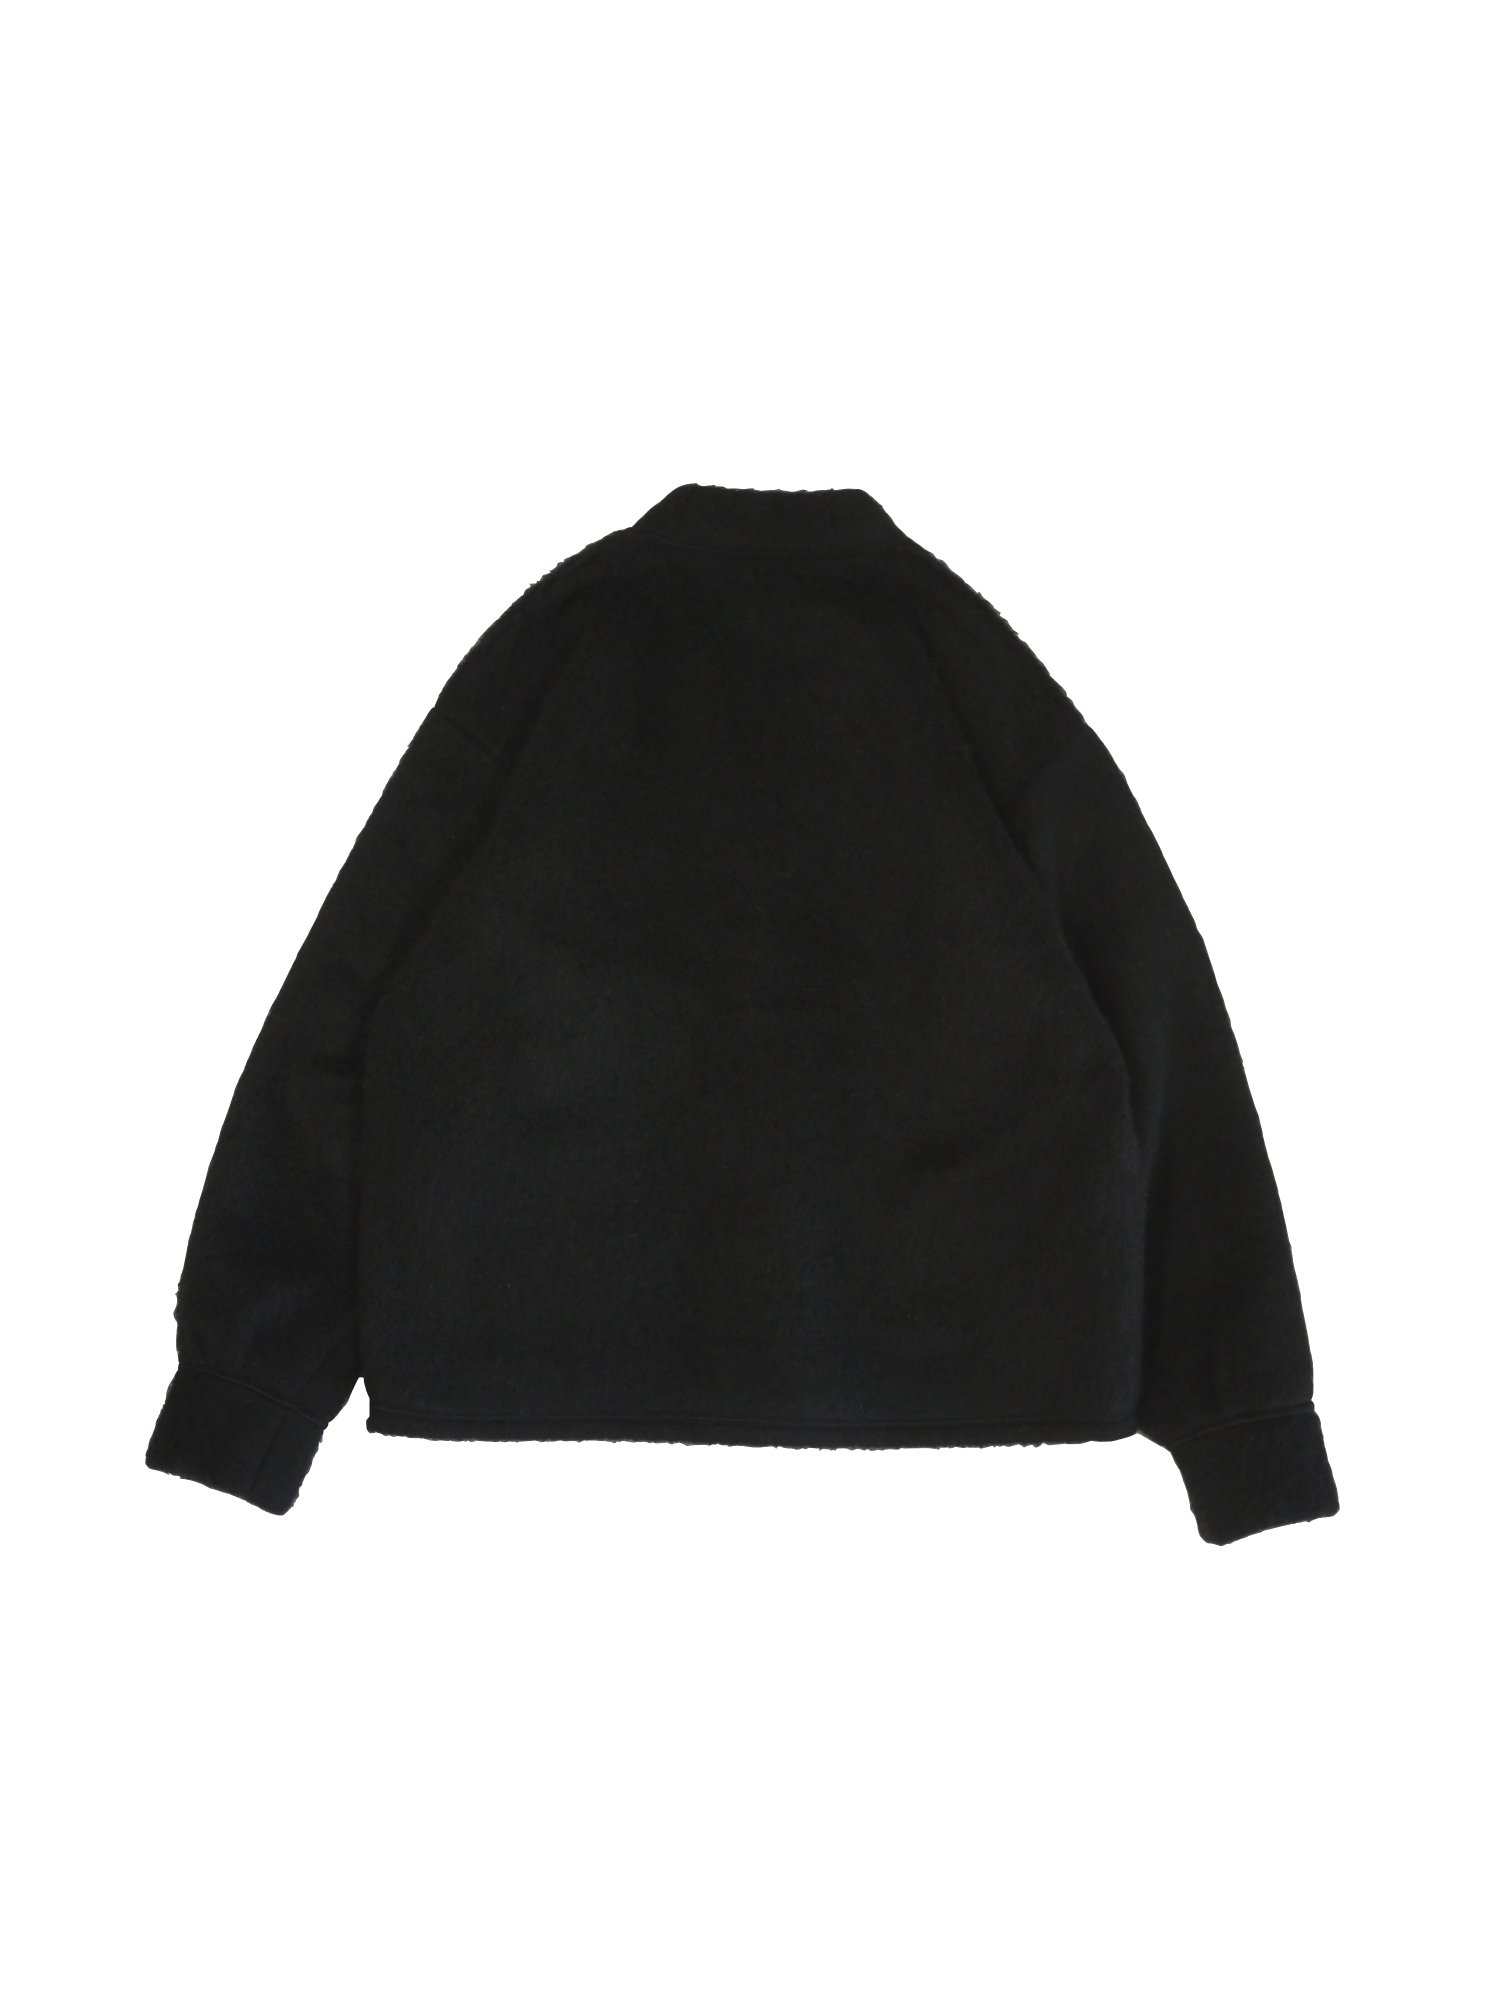 JieDa<br />MOHAIR CARDIGAN / BLACK<img class='new_mark_img2' src='https://img.shop-pro.jp/img/new/icons14.gif' style='border:none;display:inline;margin:0px;padding:0px;width:auto;' />